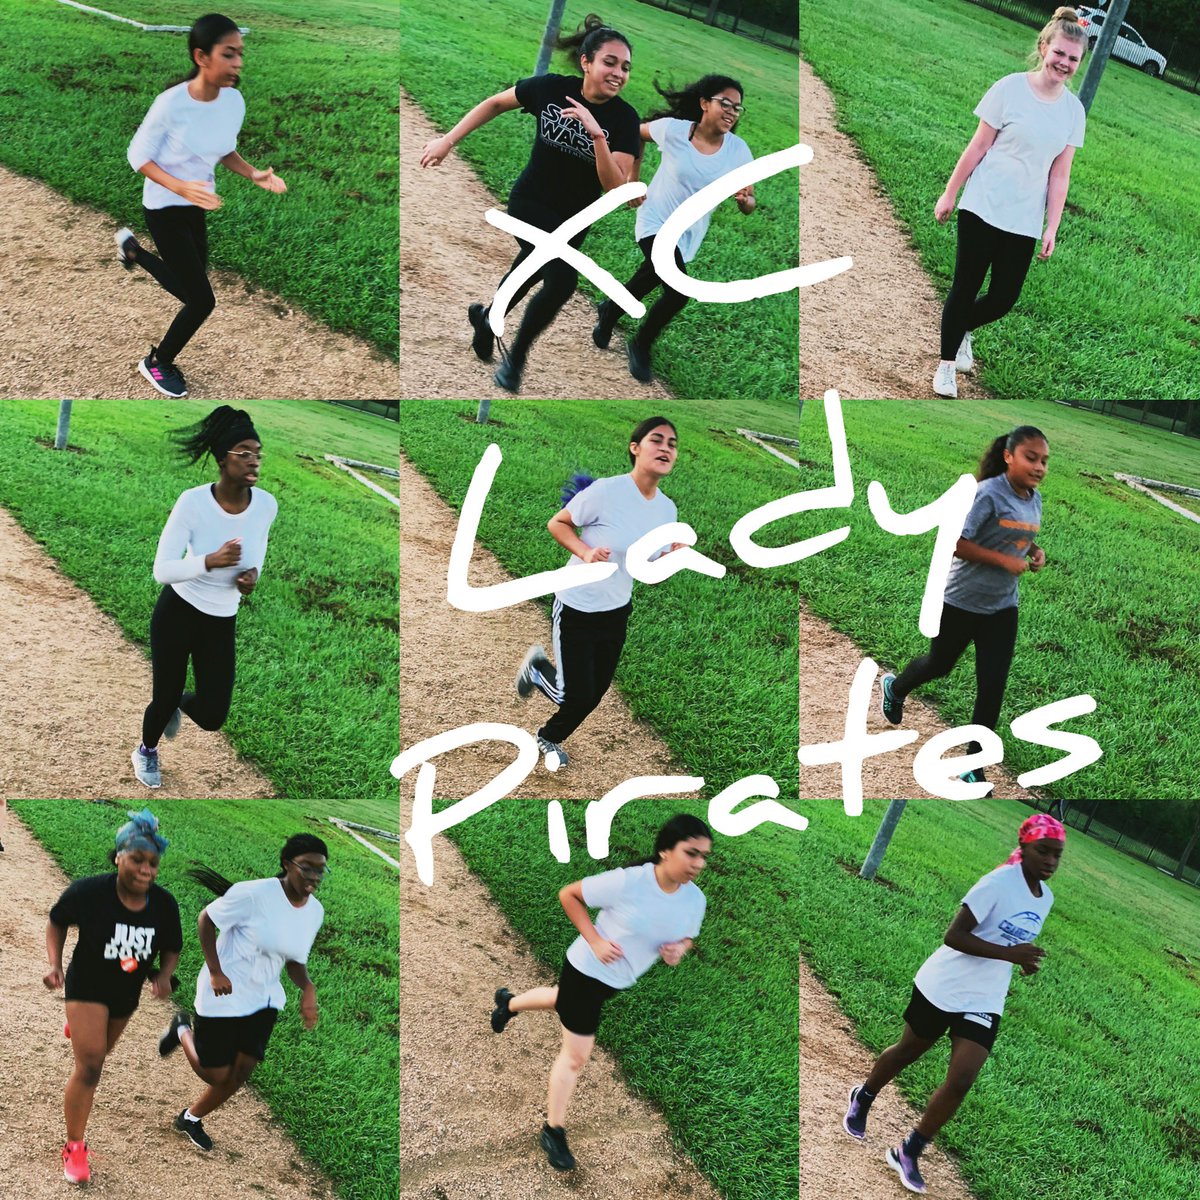 Shout out to these amazing girls for committing to early morning Cross Country practice! #XC #WillPower #EnjoyingTheProcess @hartman_ms @HartmanMS_HISD  @GJVstate #HartmanHHM